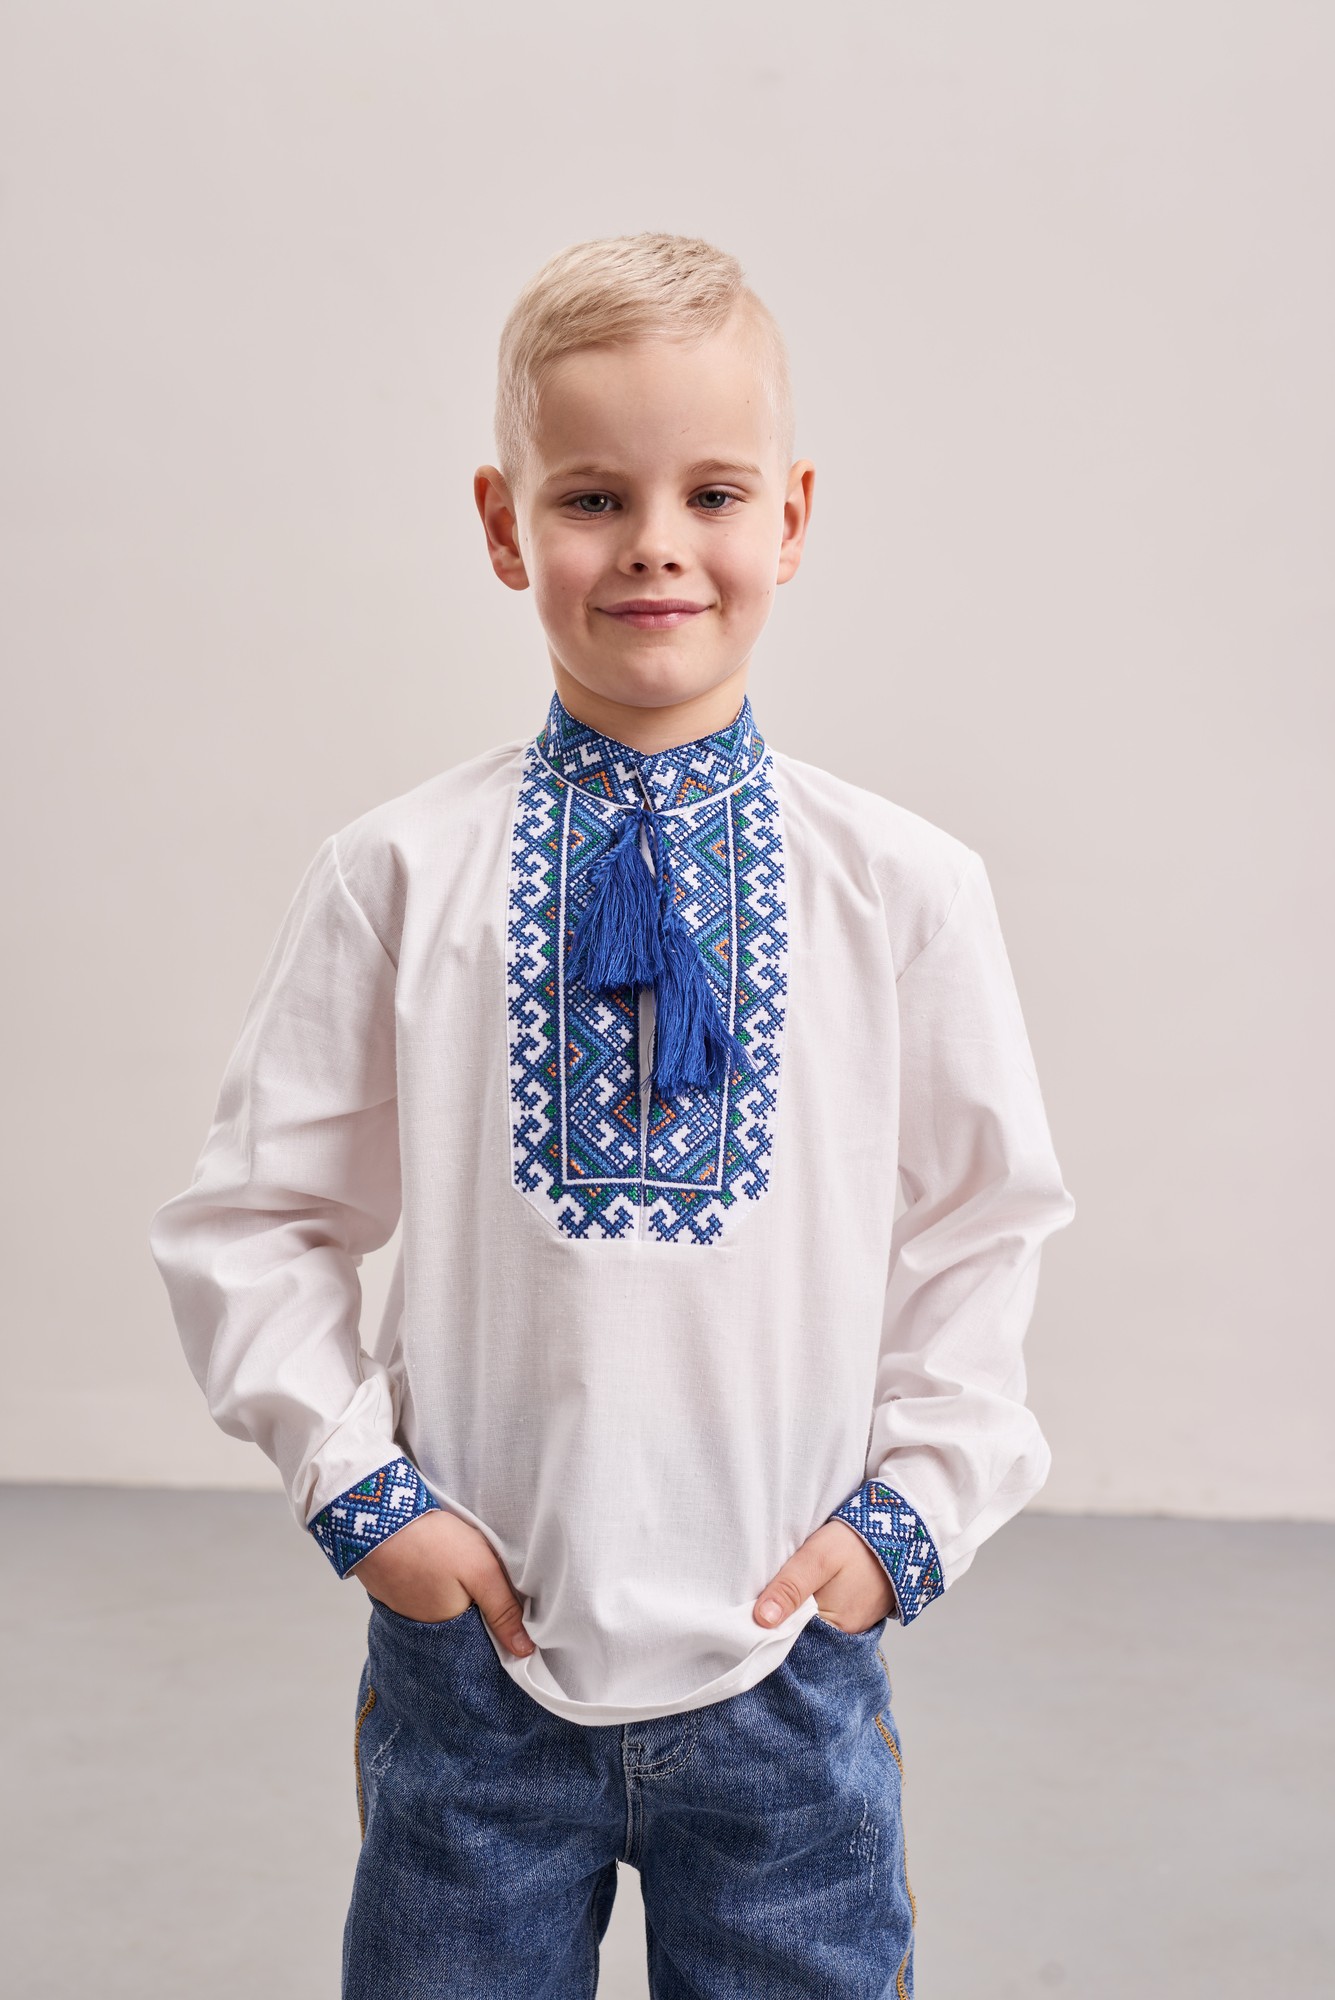 Embroidered shirt for a boy "Mykolka"